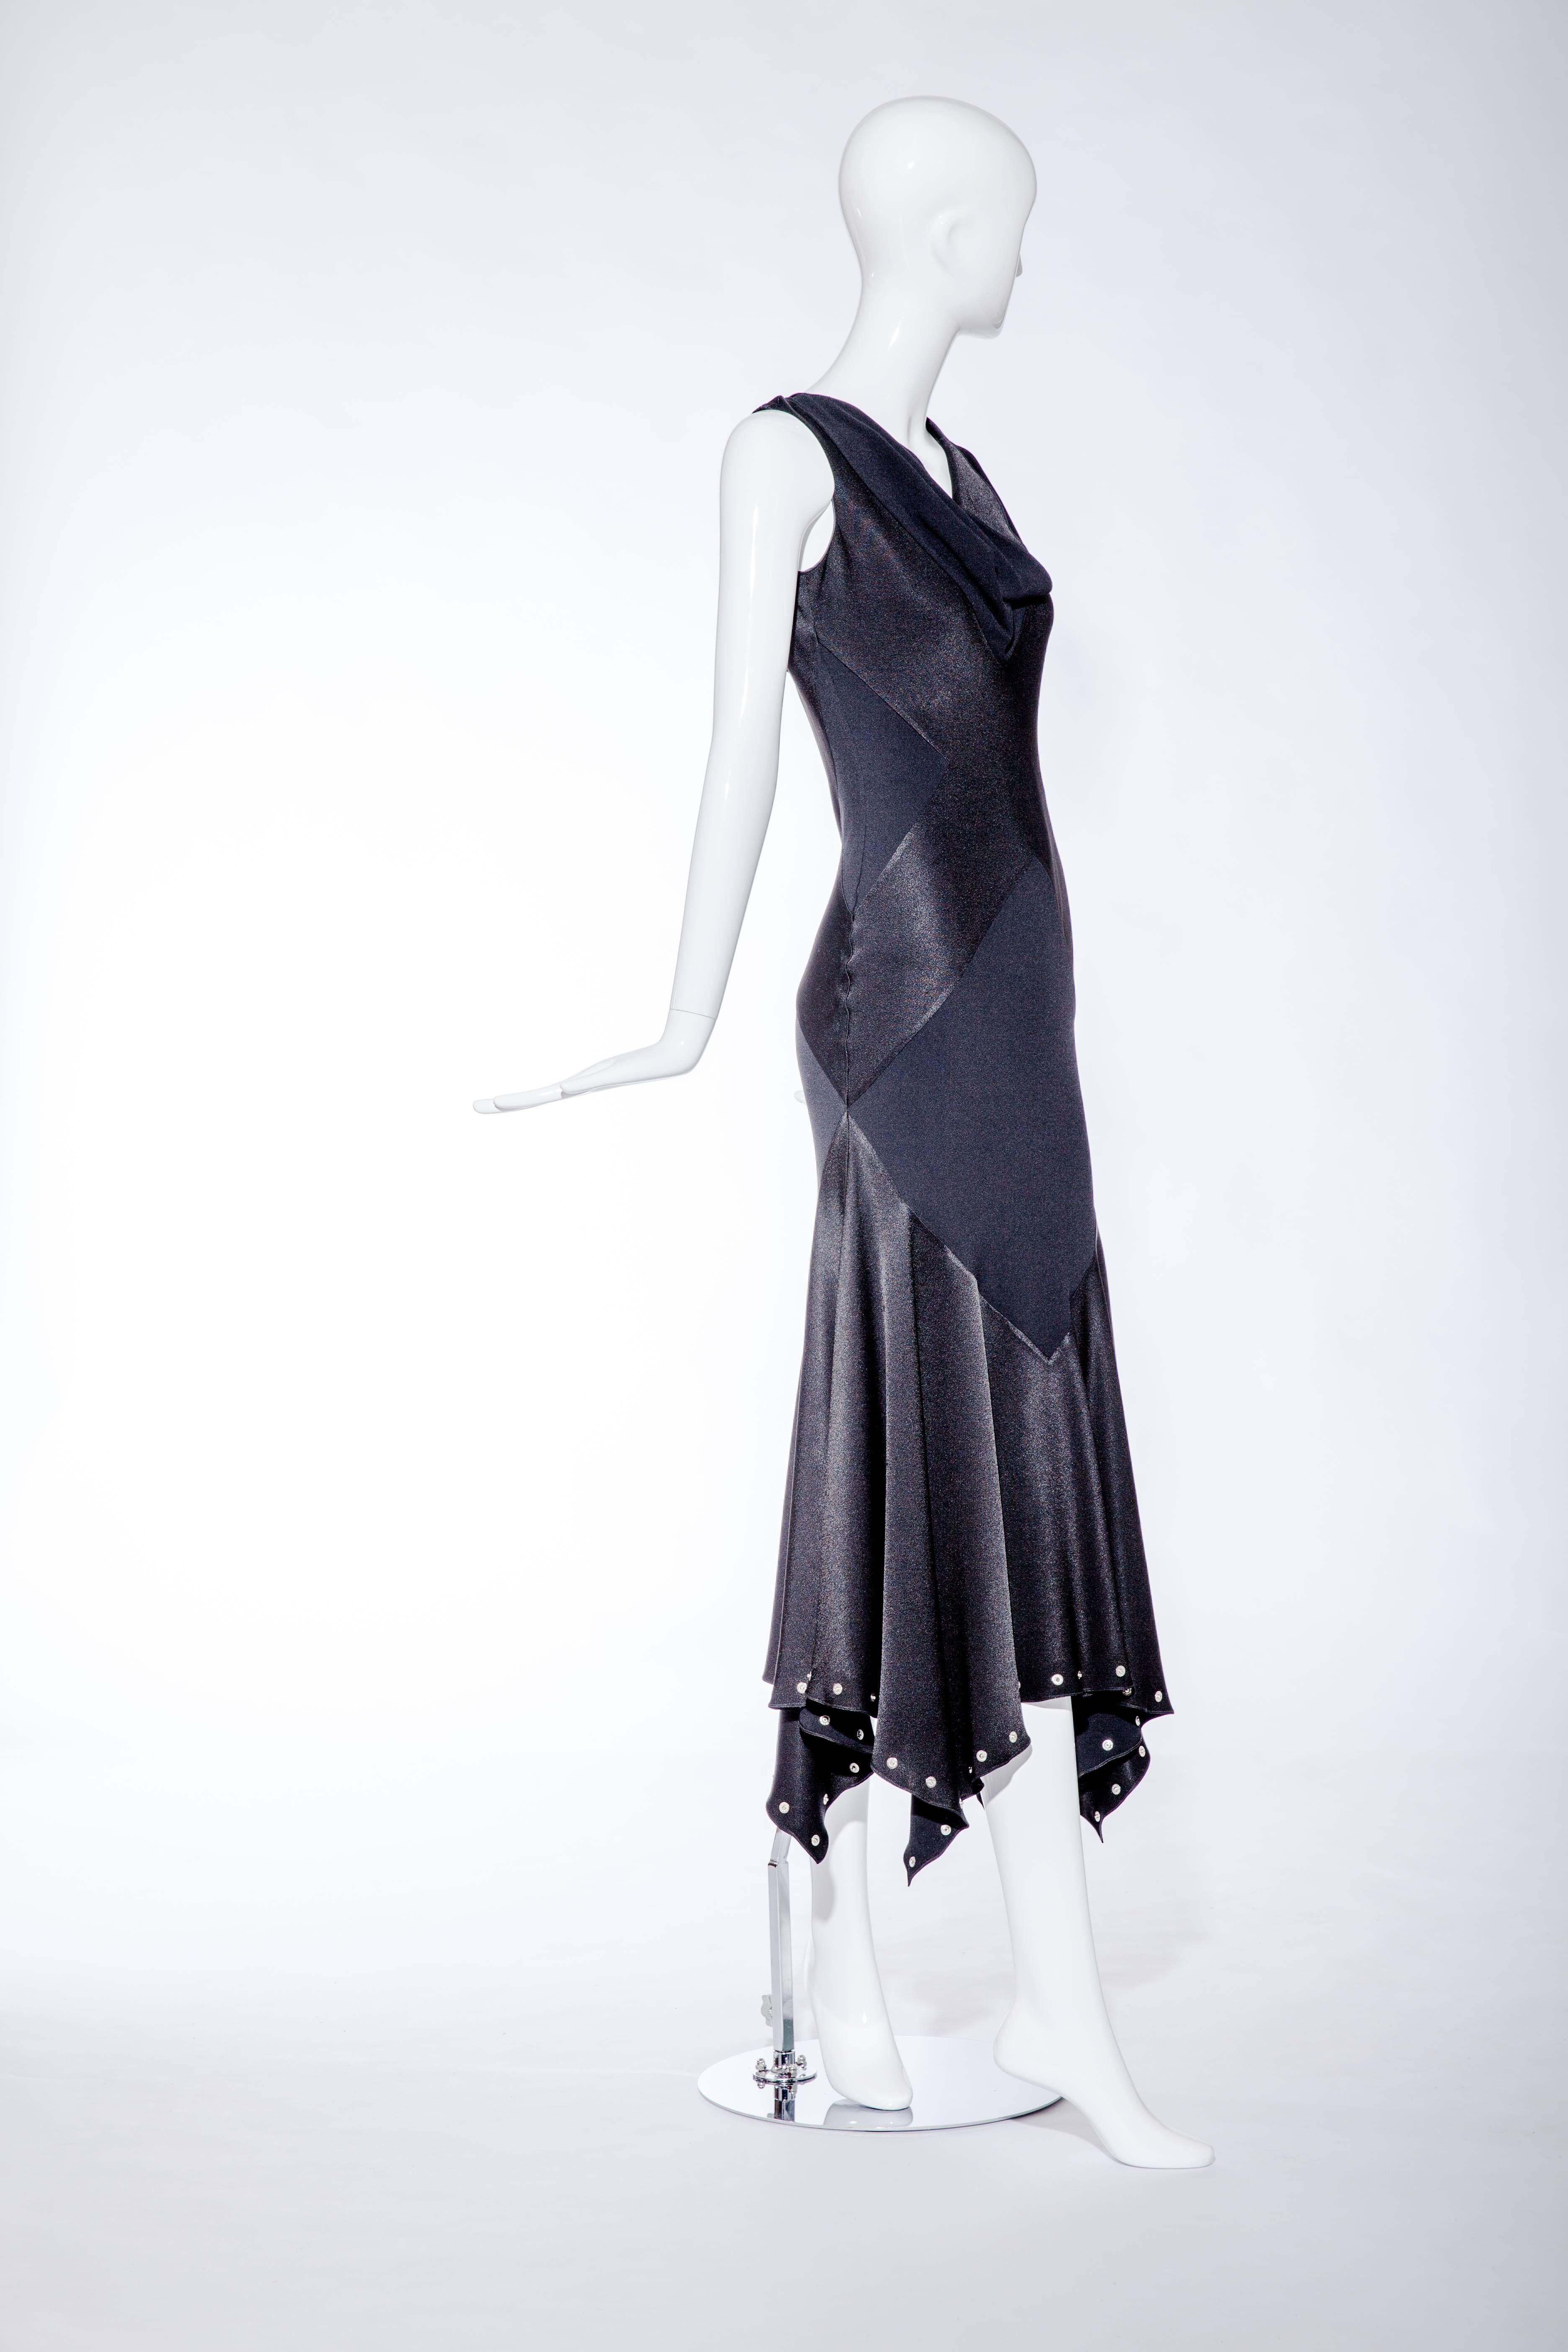 This 1990’s John Galliano black silk charmeuse dress has a biased cut and is inspired by a 1930’s design.
The hemline is studded with silver grommets and there is a subdued “X” pattern on the front and back of the dress and the draping of the cowl